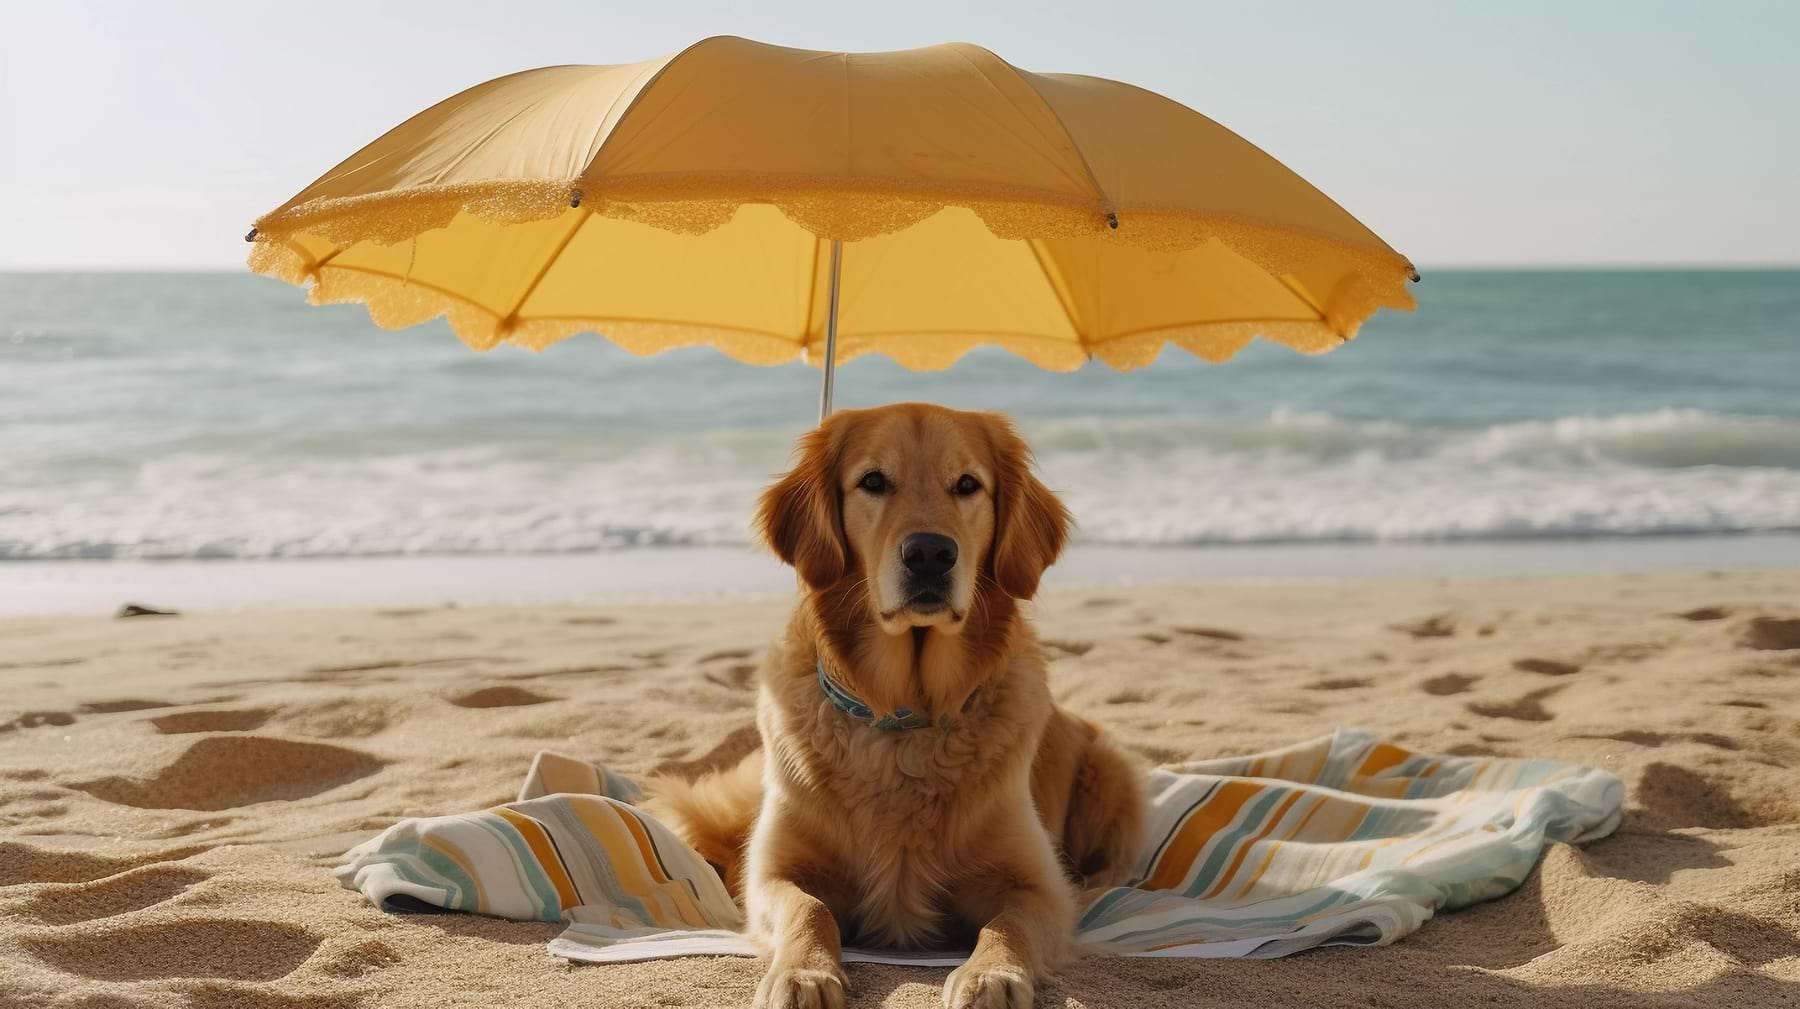 A dog laying on a blanket under an umbrella